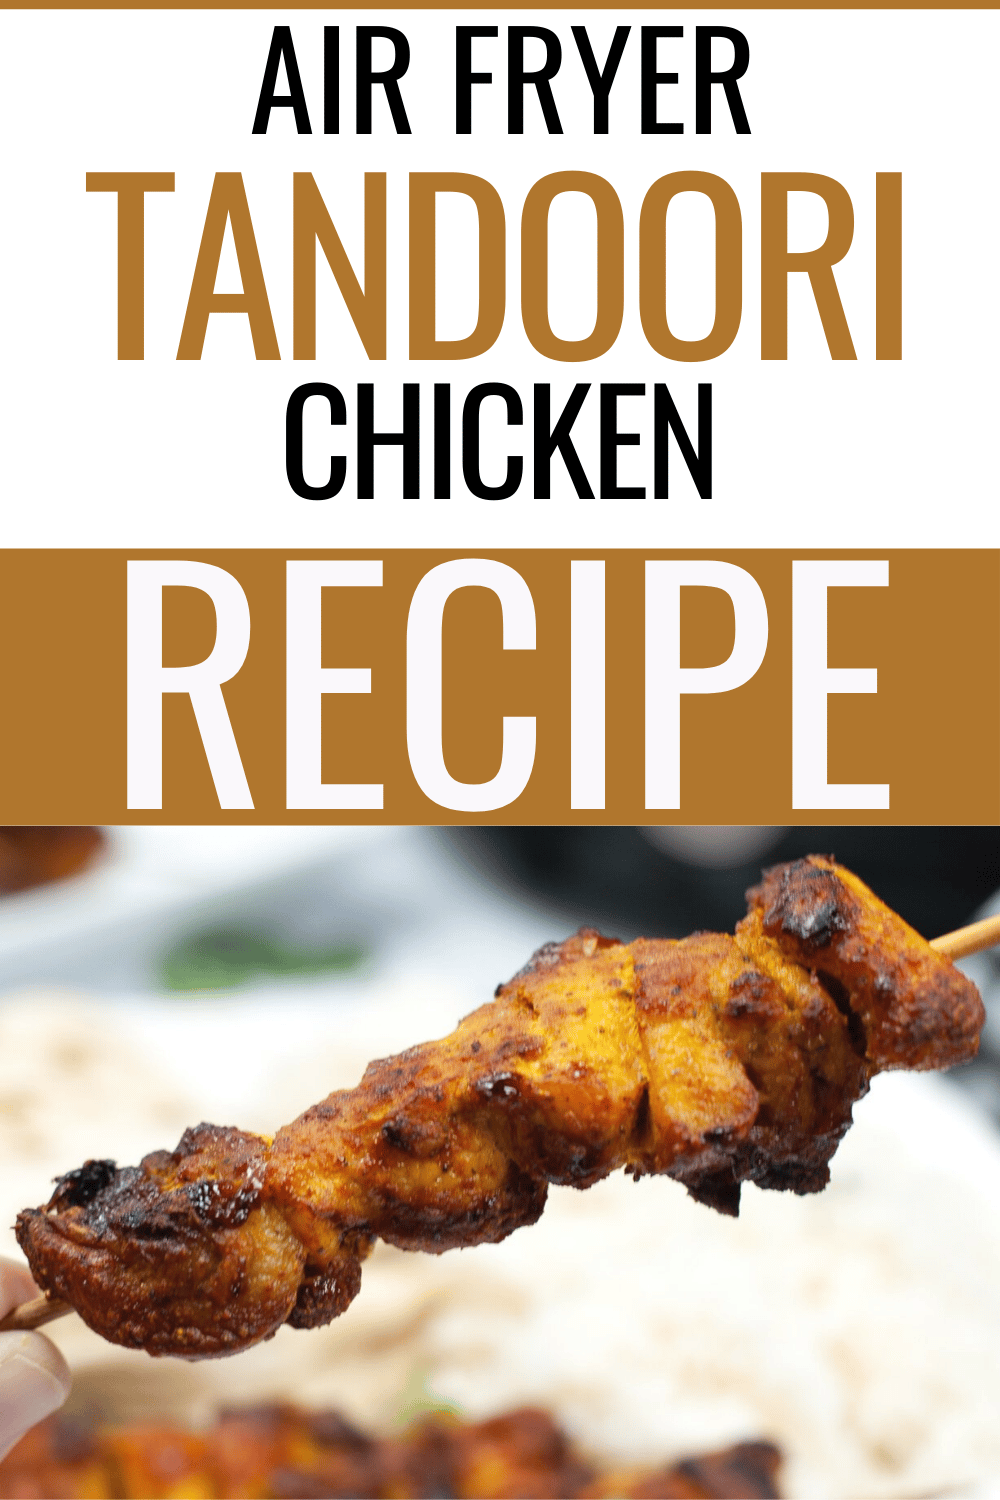 Air Fryer Tandoori Chicken is a delicious, healthy, and easy-to-make dish. It is perfect for a weeknight meal and your family will enjoy it. #airfryer #tandoorichicken #chicken #recipe via @wondermomwannab